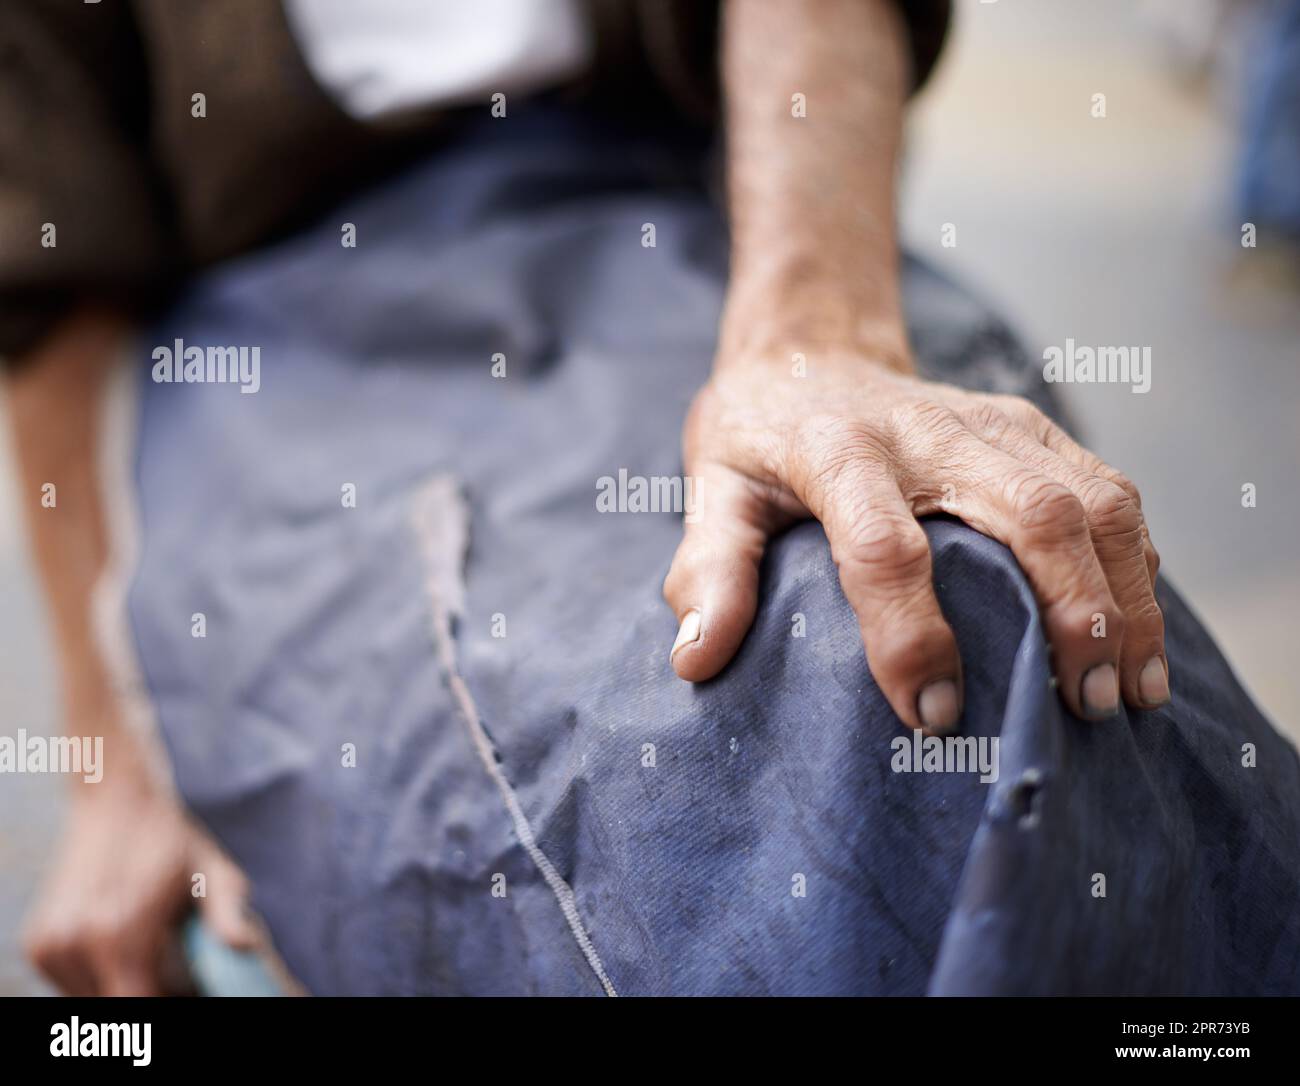 Getting old with dignity. Cropped shot of an elderly man wearing an apron. Stock Photo